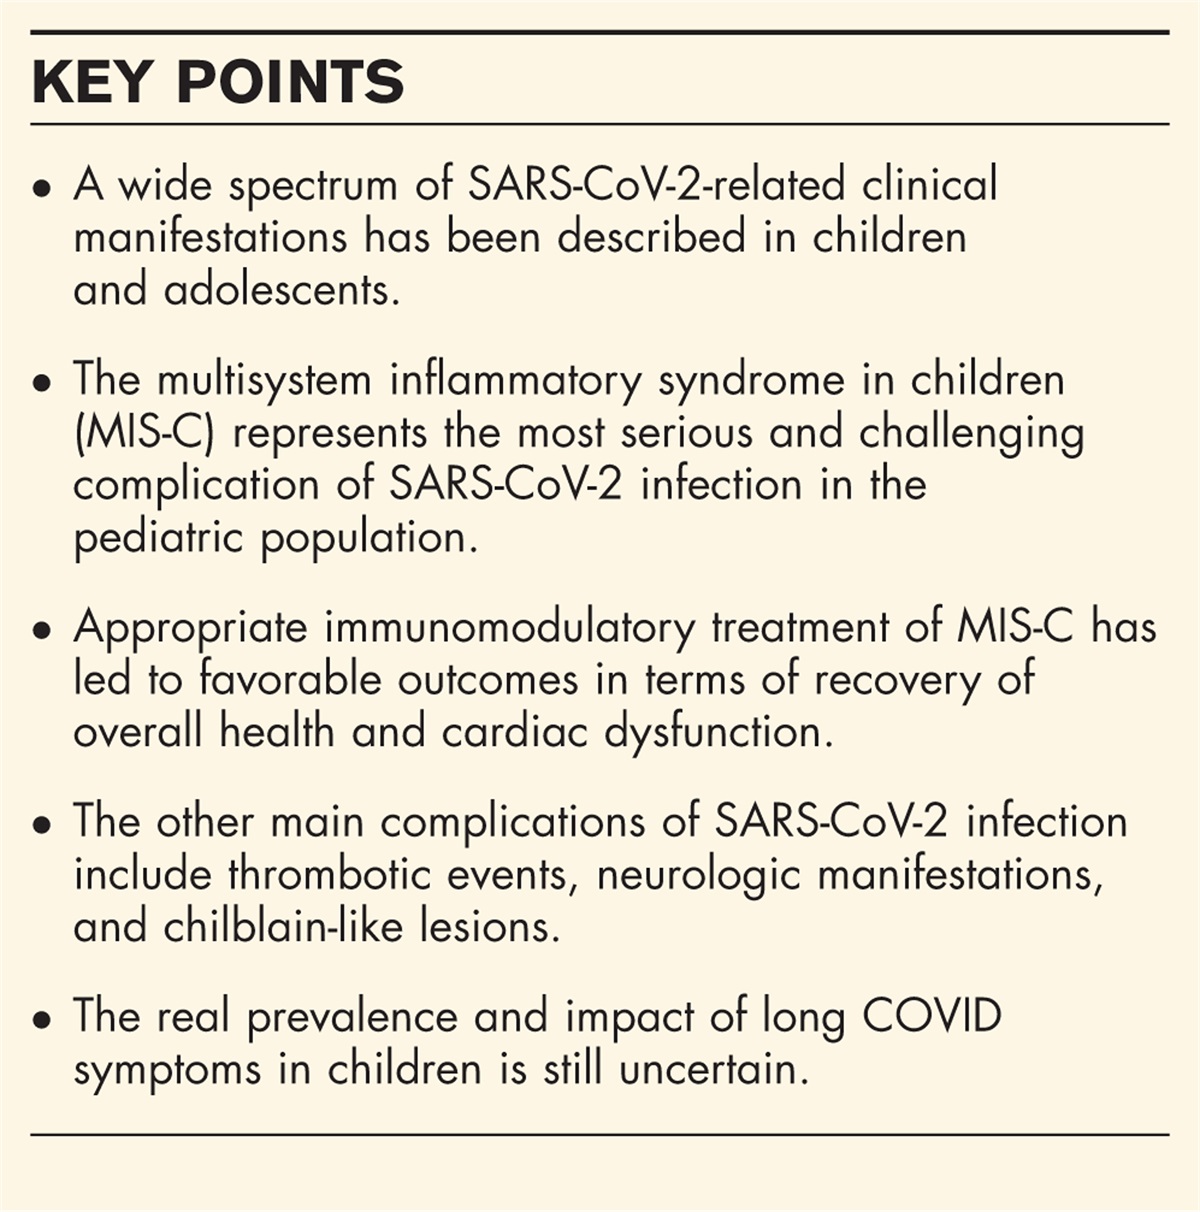 Complications of severe acute respiratory syndrome coronavirus 2 infection in children